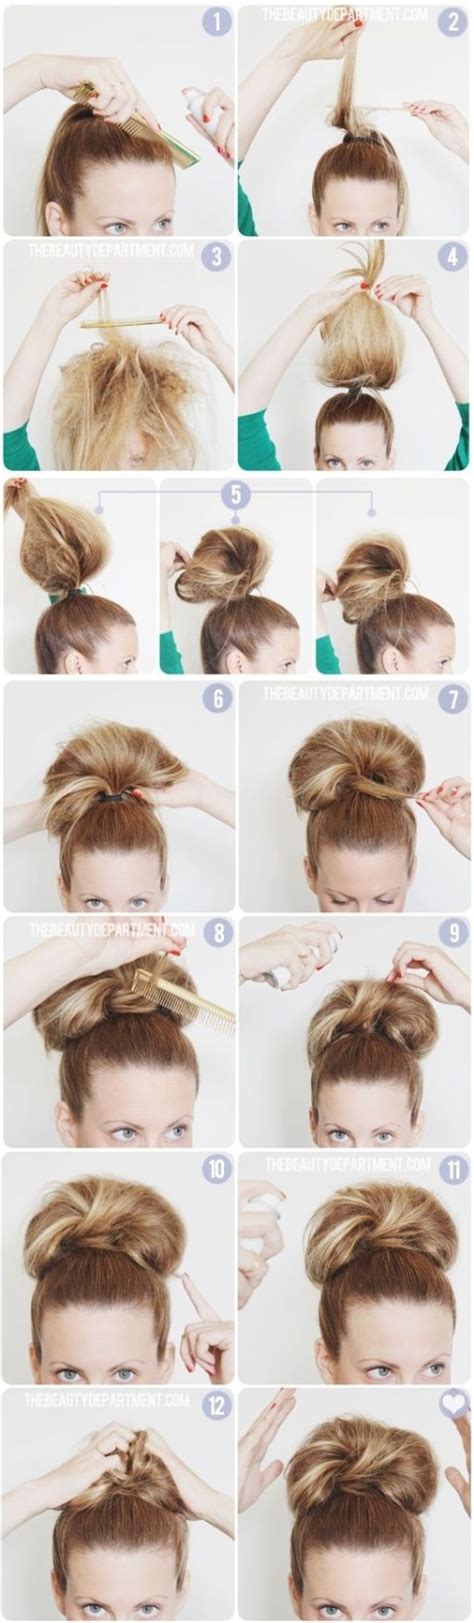 simple  stylish updo hairstyle tutorials   occasions